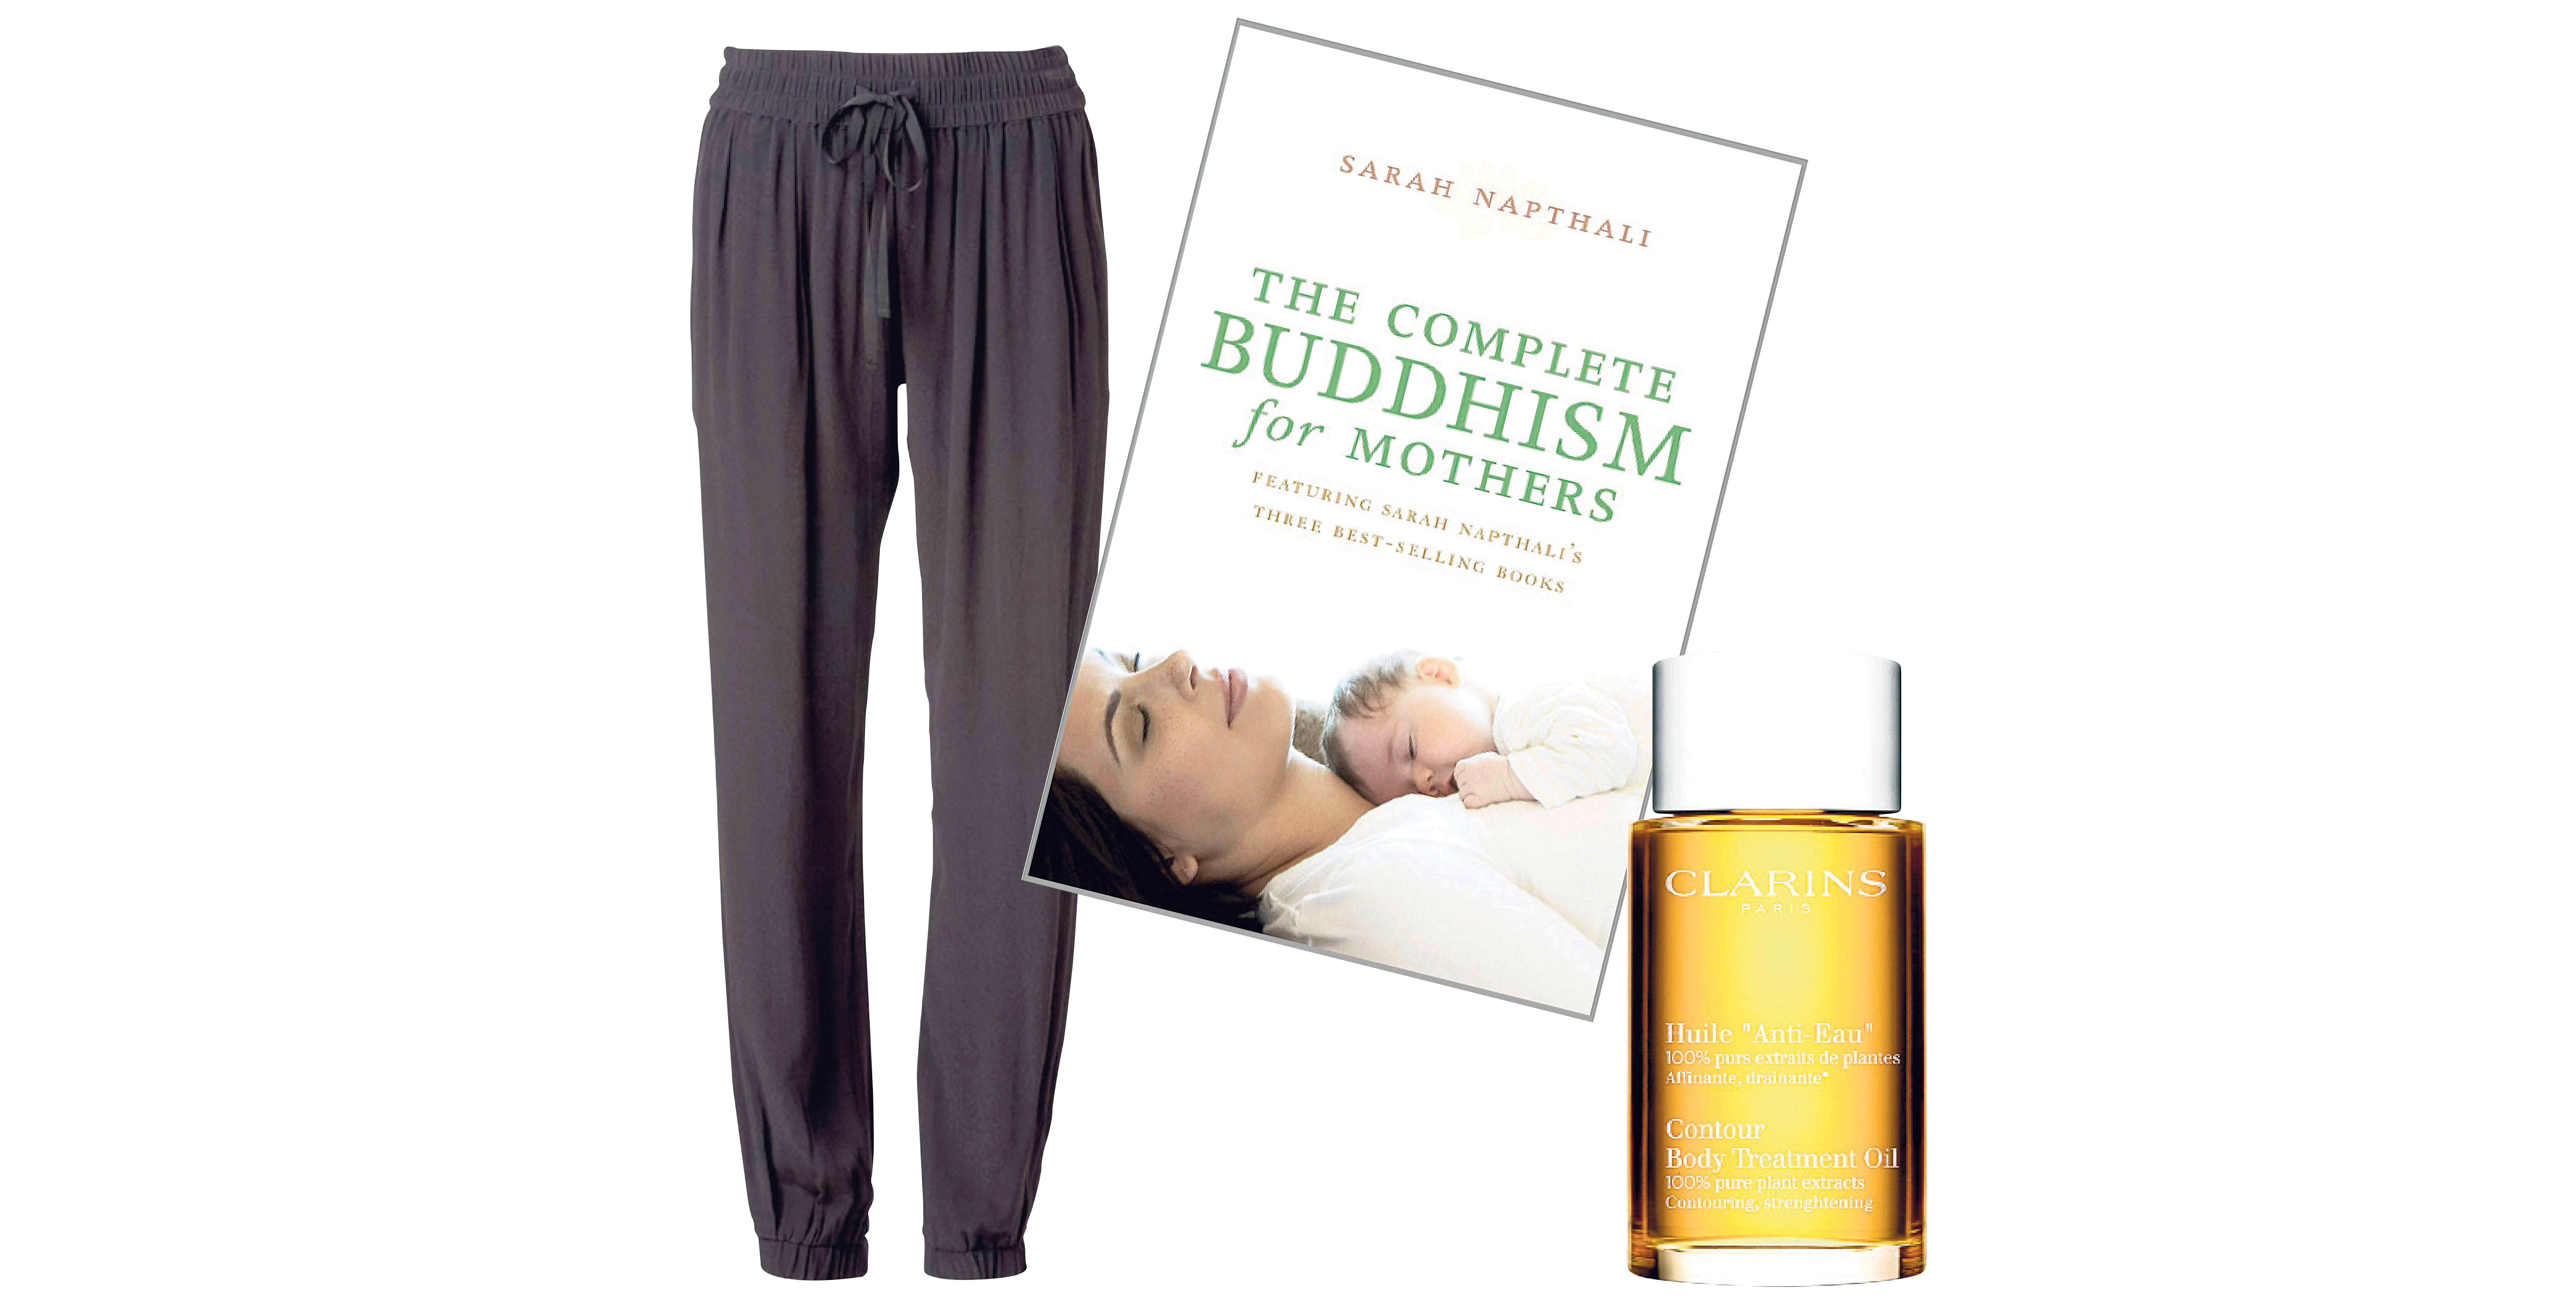 Sass & bide pants; The Complete Buddhism for Mothers by Sarah Napthali; Clarins Huile Tonic.